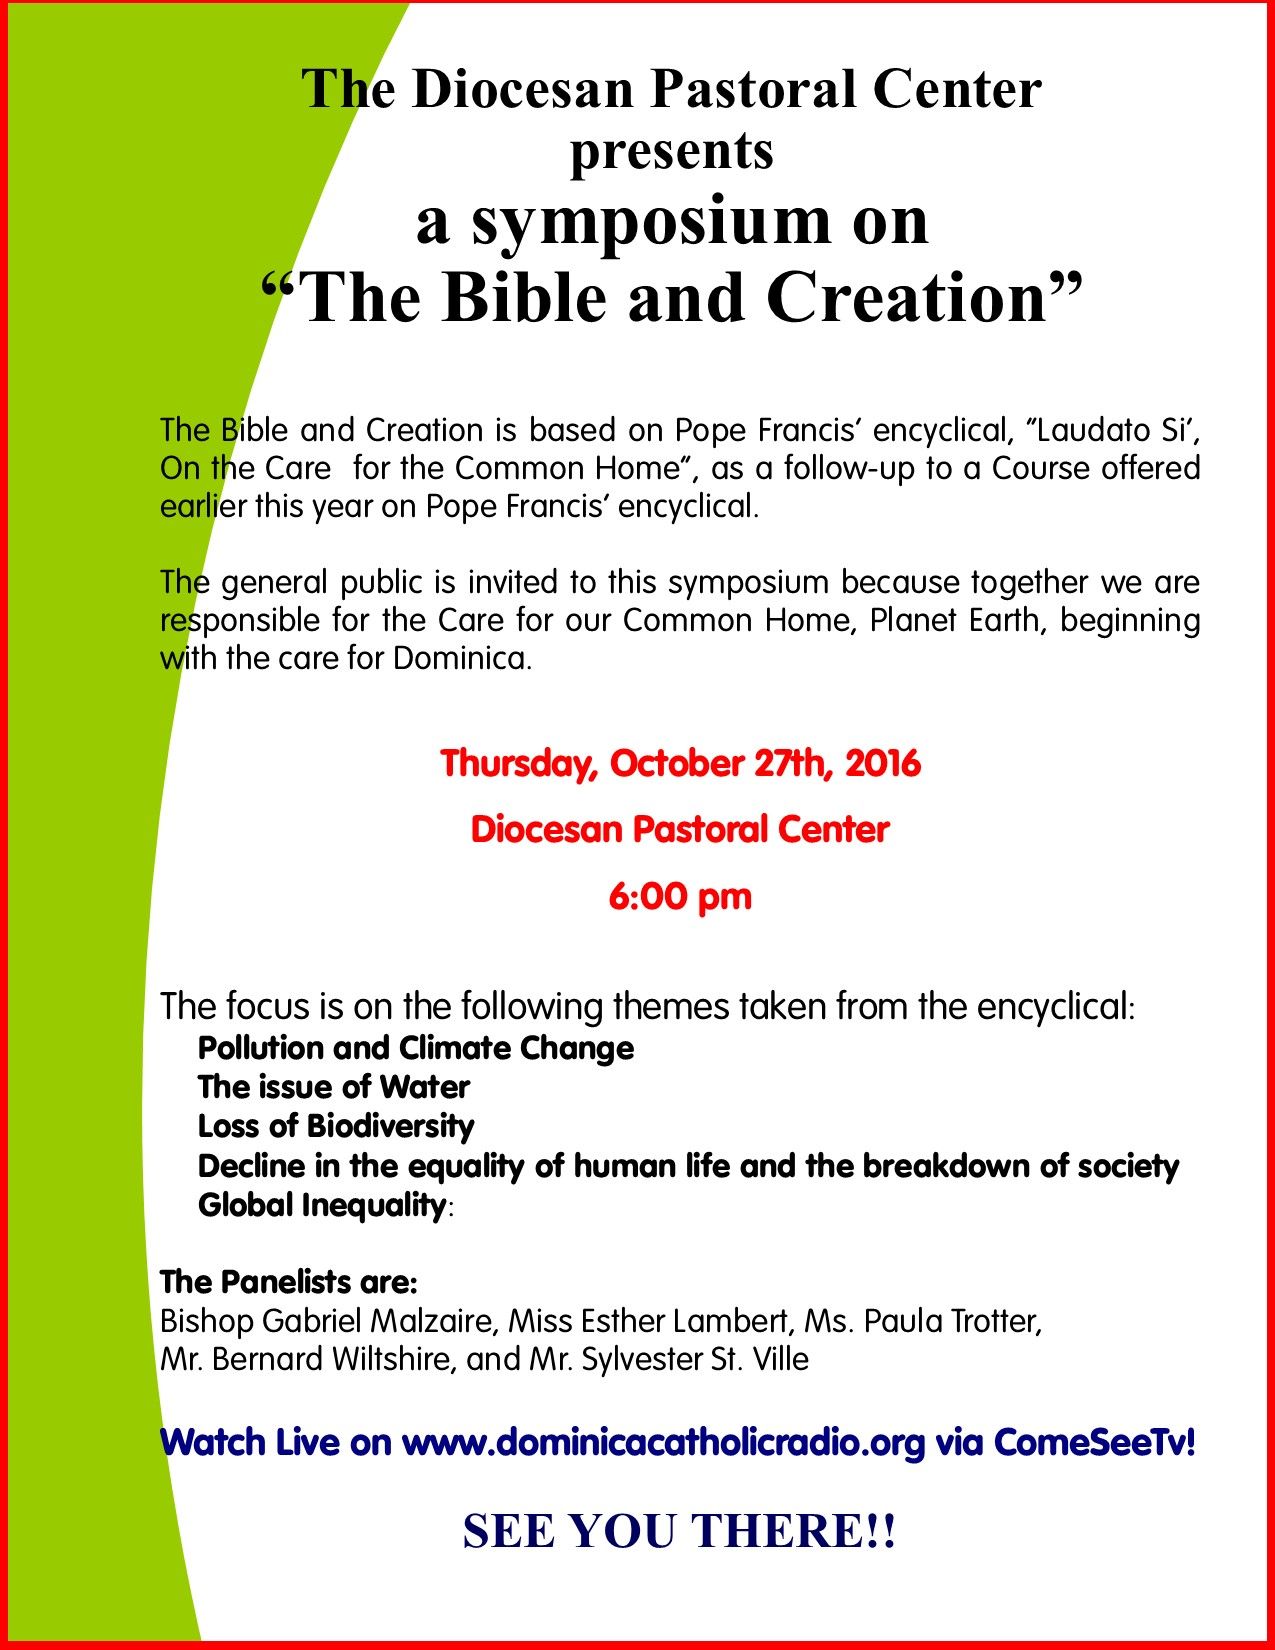 Symposium on The Bible and Creation